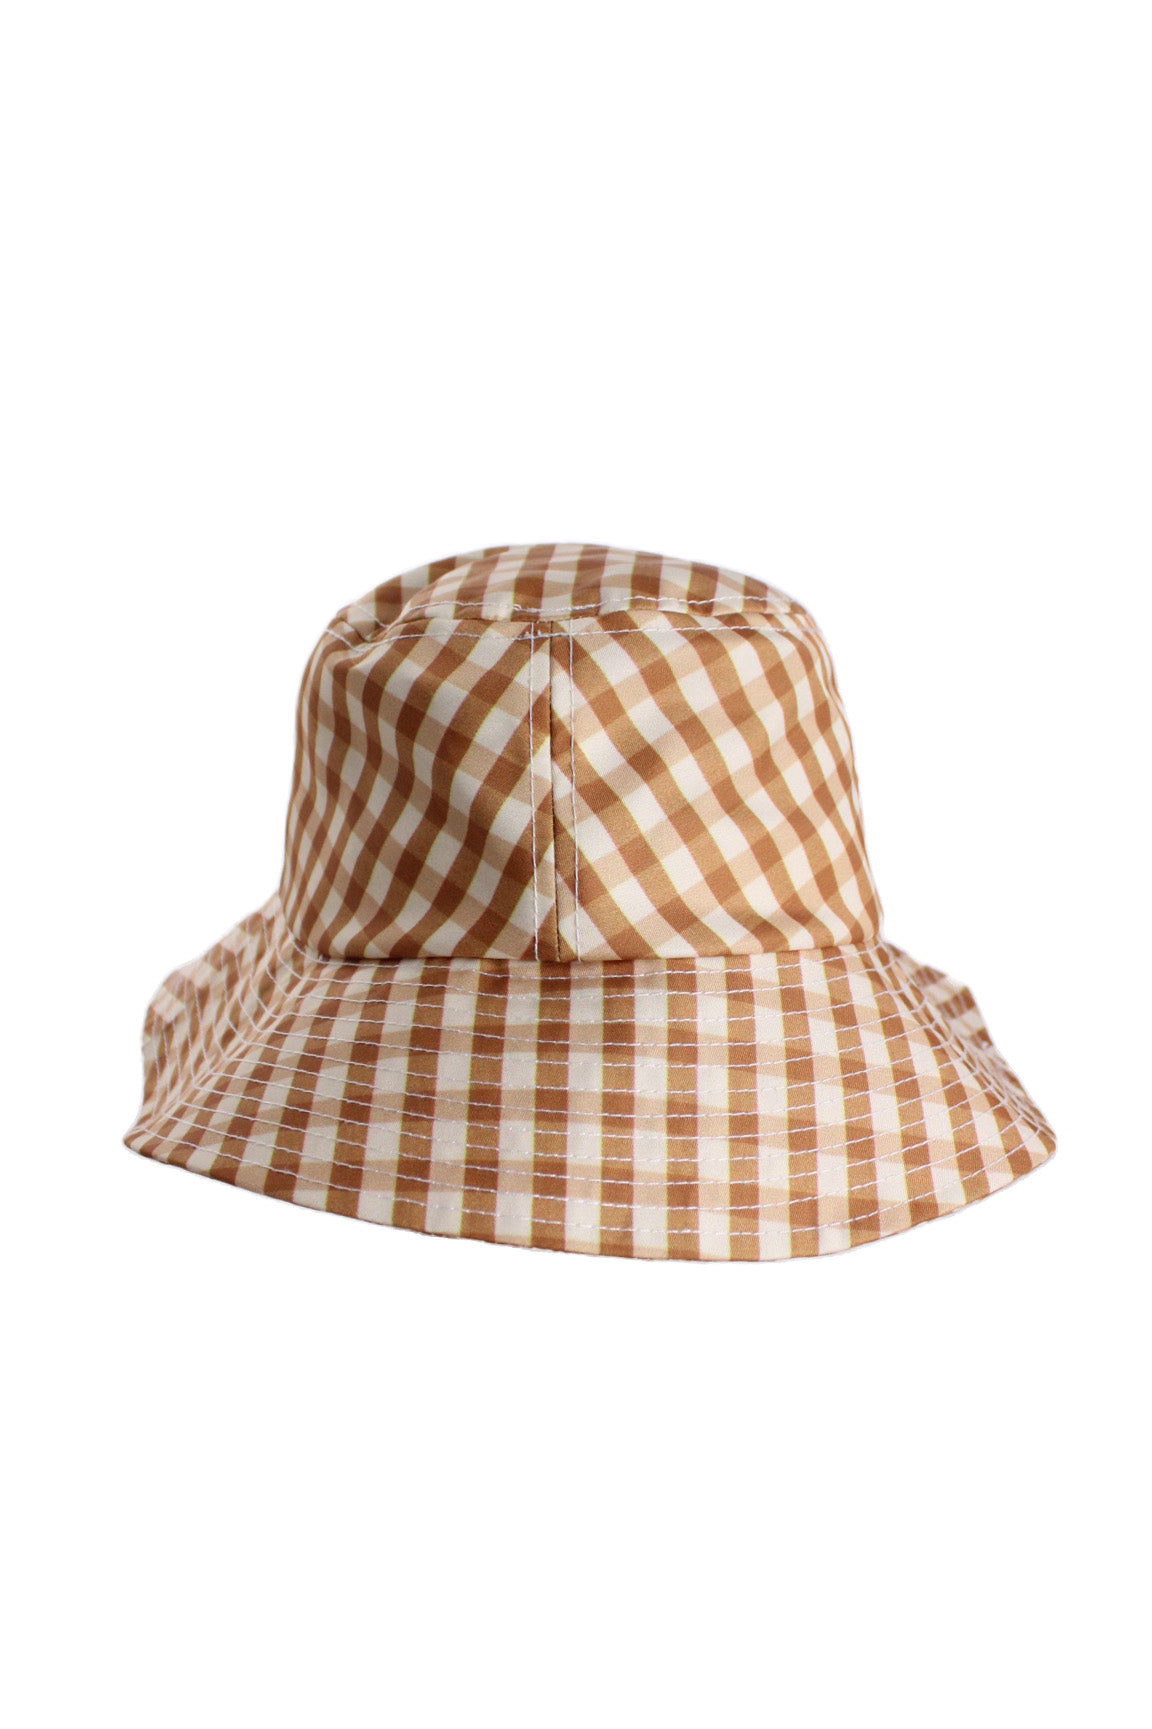 back angle of bucket hat. seam on crown where pattern does not perfect match. 